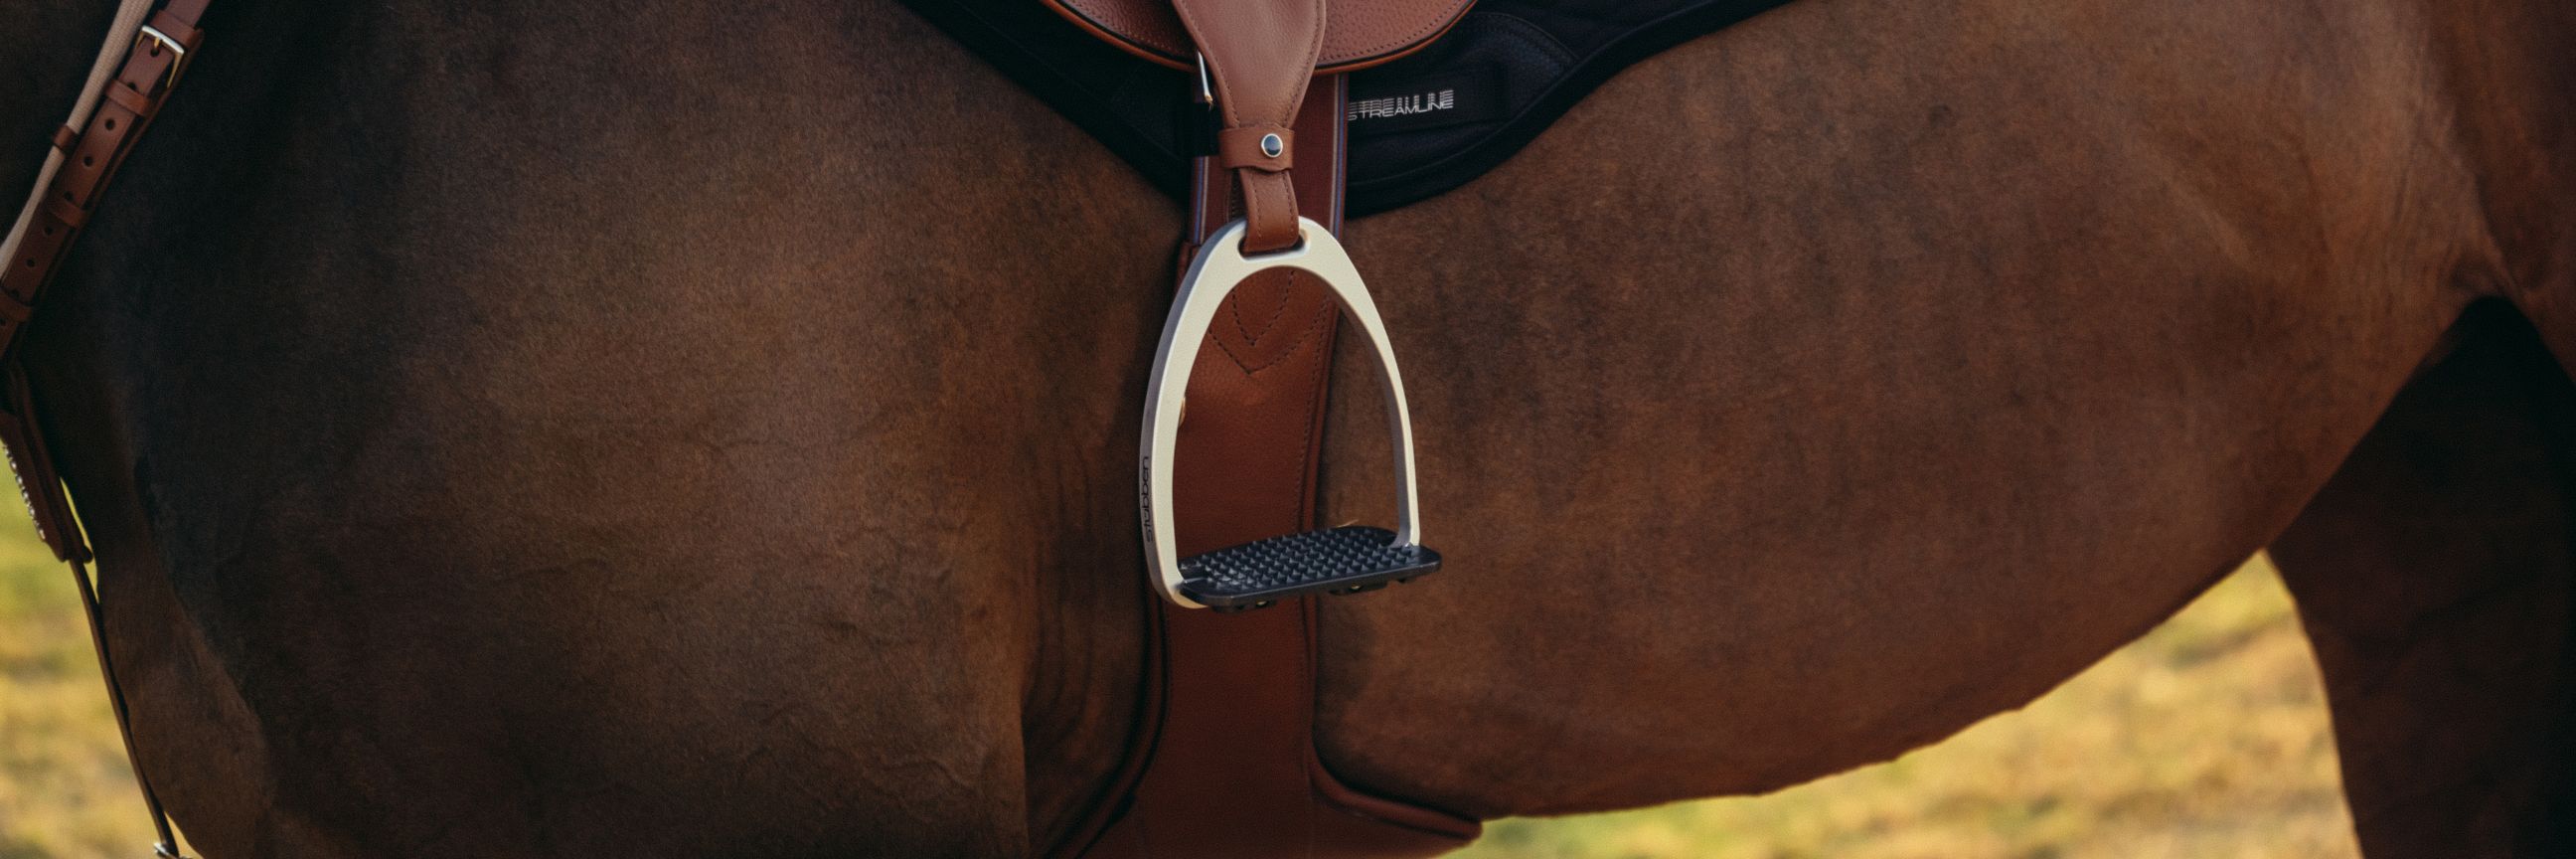 Saddle accessories and stirrup